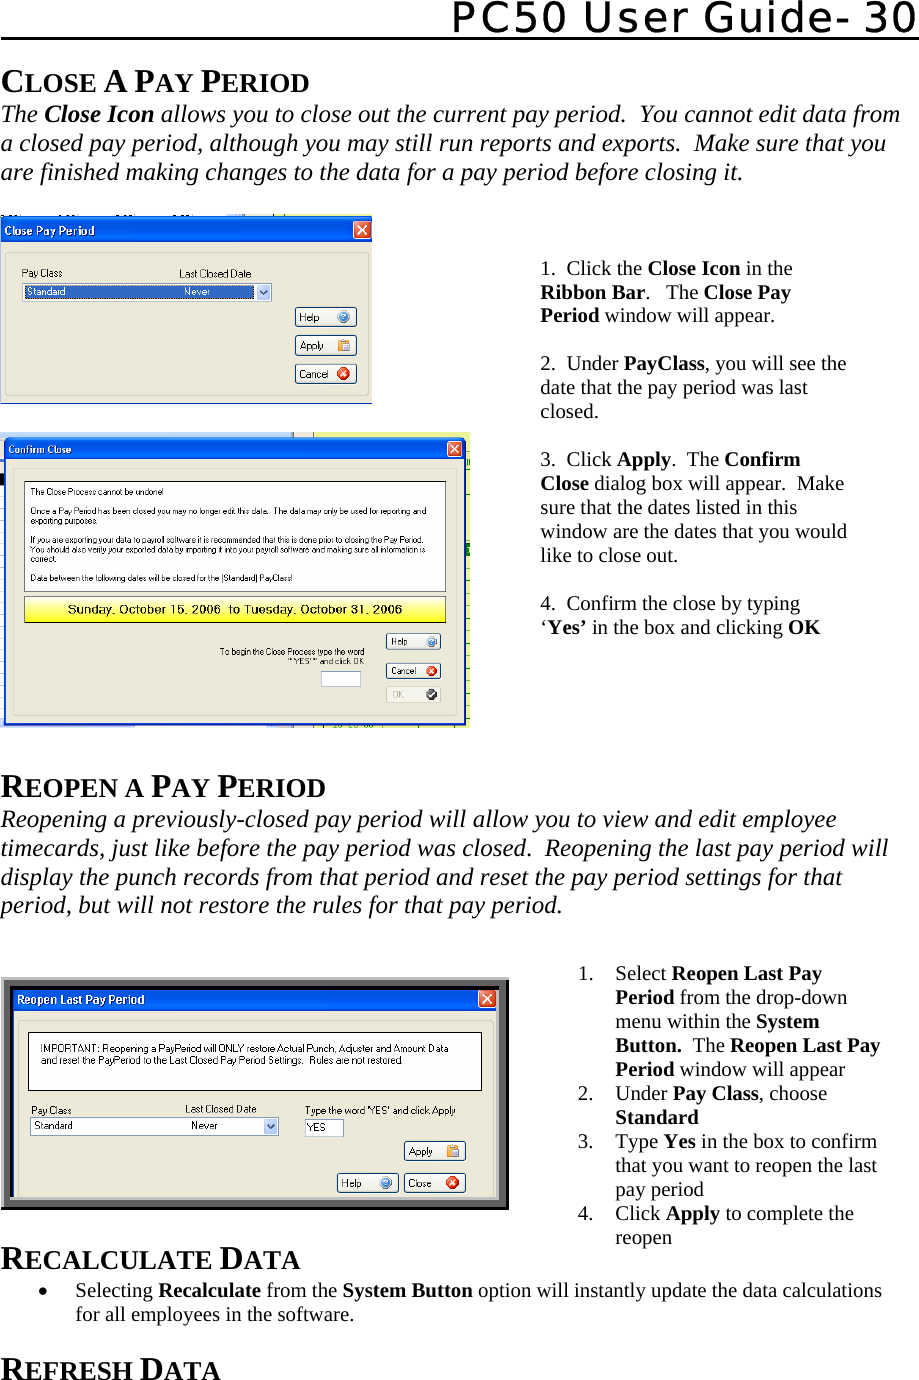   PC50 User Guide- 30   CLOSE A PAY PERIOD The Close Icon allows you to close out the current pay period.  You cannot edit data from a closed pay period, although you may still run reports and exports.  Make sure that you are finished making changes to the data for a pay period before closing it.       REOPEN A PAY PERIOD Reopening a previously-closed pay period will allow you to view and edit employee timecards, just like before the pay period was closed.  Reopening the last pay period will display the punch records from that period and reset the pay period settings for that period, but will not restore the rules for that pay period.     RECALCULATE DATA • Selecting Recalculate from the System Button option will instantly update the data calculations for all employees in the software.  REFRESH DATA 1. Select Reopen Last Pay Period from the drop-down menu within the System Button.  The Reopen Last Pay Period window will appear 2. Under Pay Class, choose Standard 3. Type Yes in the box to confirm that you want to reopen the last pay period 4. Click Apply to complete the reopen 1.  Click the Close Icon in the Ribbon Bar.   The Close Pay Period window will appear.  2.  Under PayClass, you will see the date that the pay period was last closed.  3.  Click Apply.  The Confirm Close dialog box will appear.  Make sure that the dates listed in this window are the dates that you would like to close out.  4.  Confirm the close by typing ‘Yes’ in the box and clicking OK  